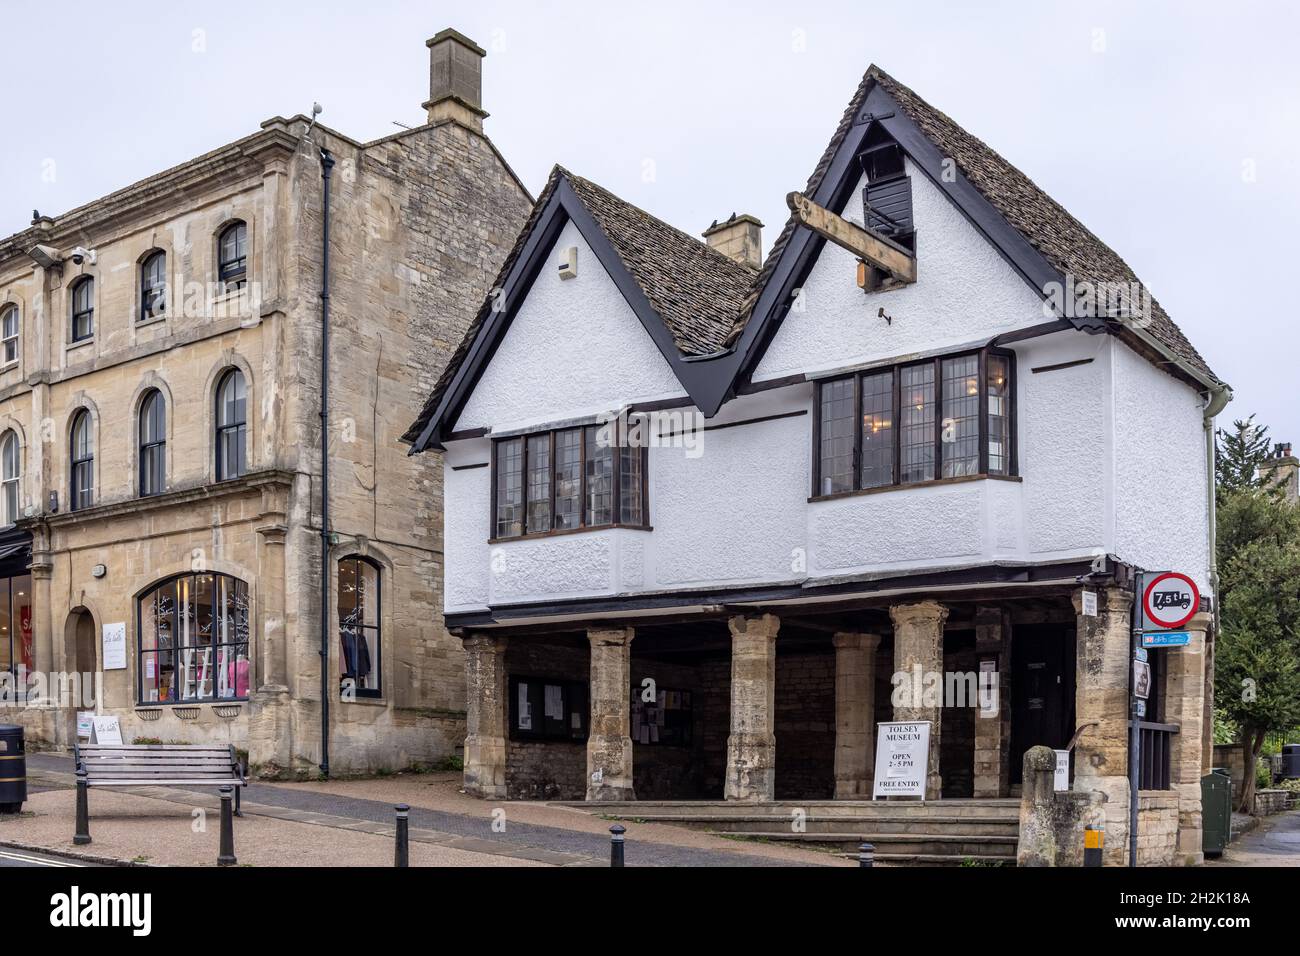 The black and white timber fronted Tolsey Museum on the high street at Burford, Oxfordshire, often referred to as the 'Gateway to the Cotswolds'. Stock Photo